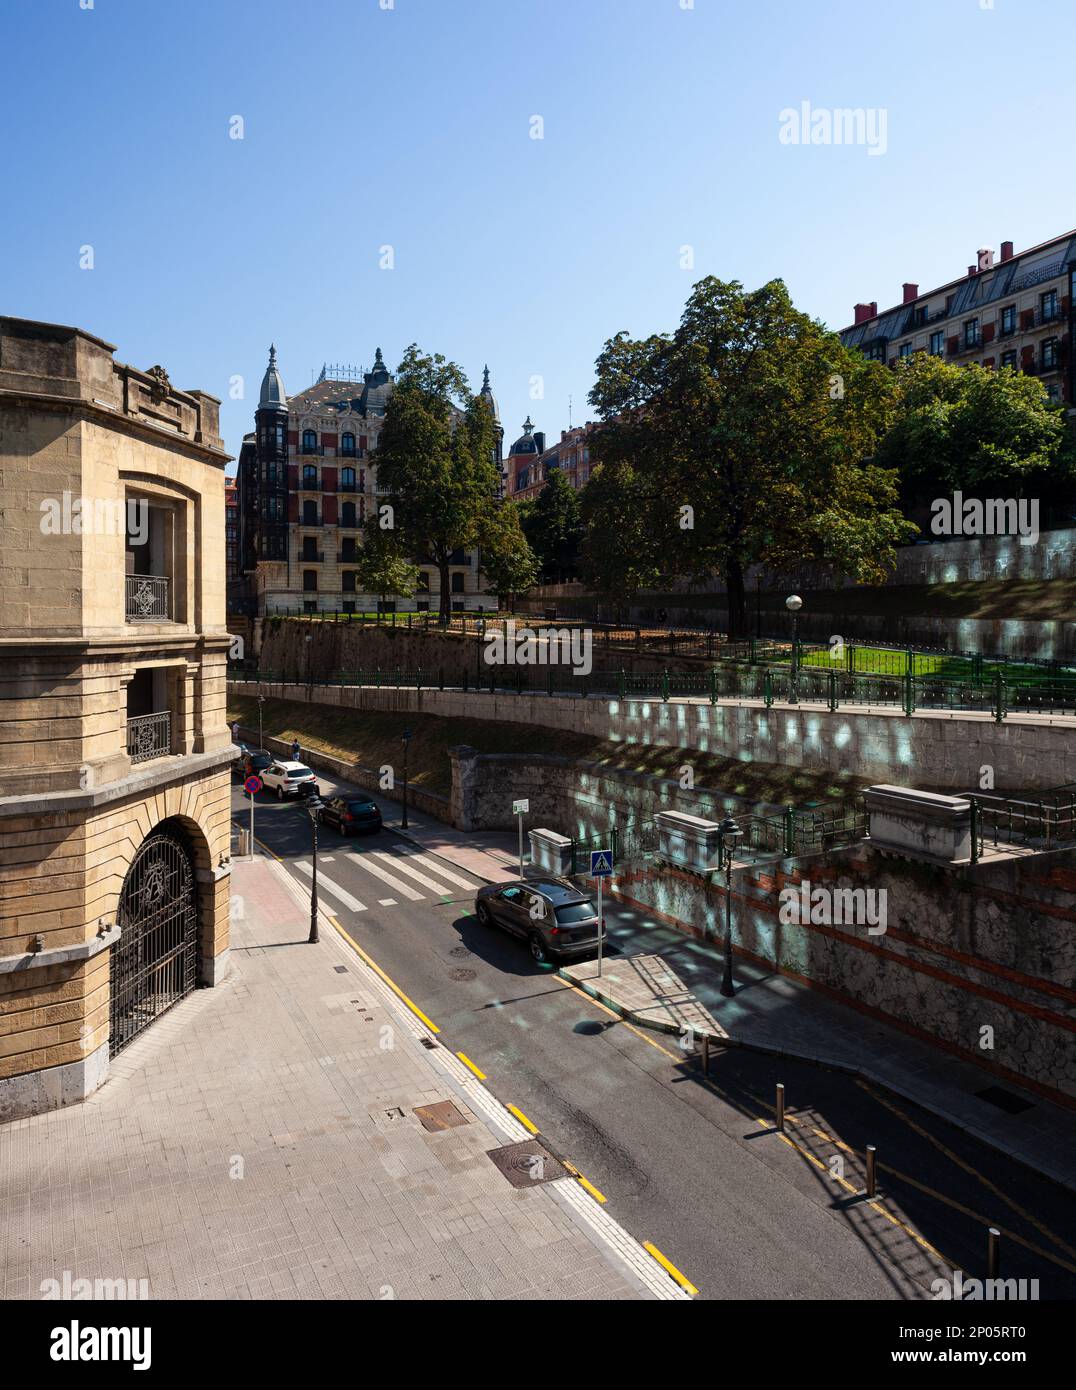 Bilbao, Spain - August 02, 2022: Uribitarte Street, with the facade of the old Franco deposit in the foreground, the Albia building in the background Stock Photo